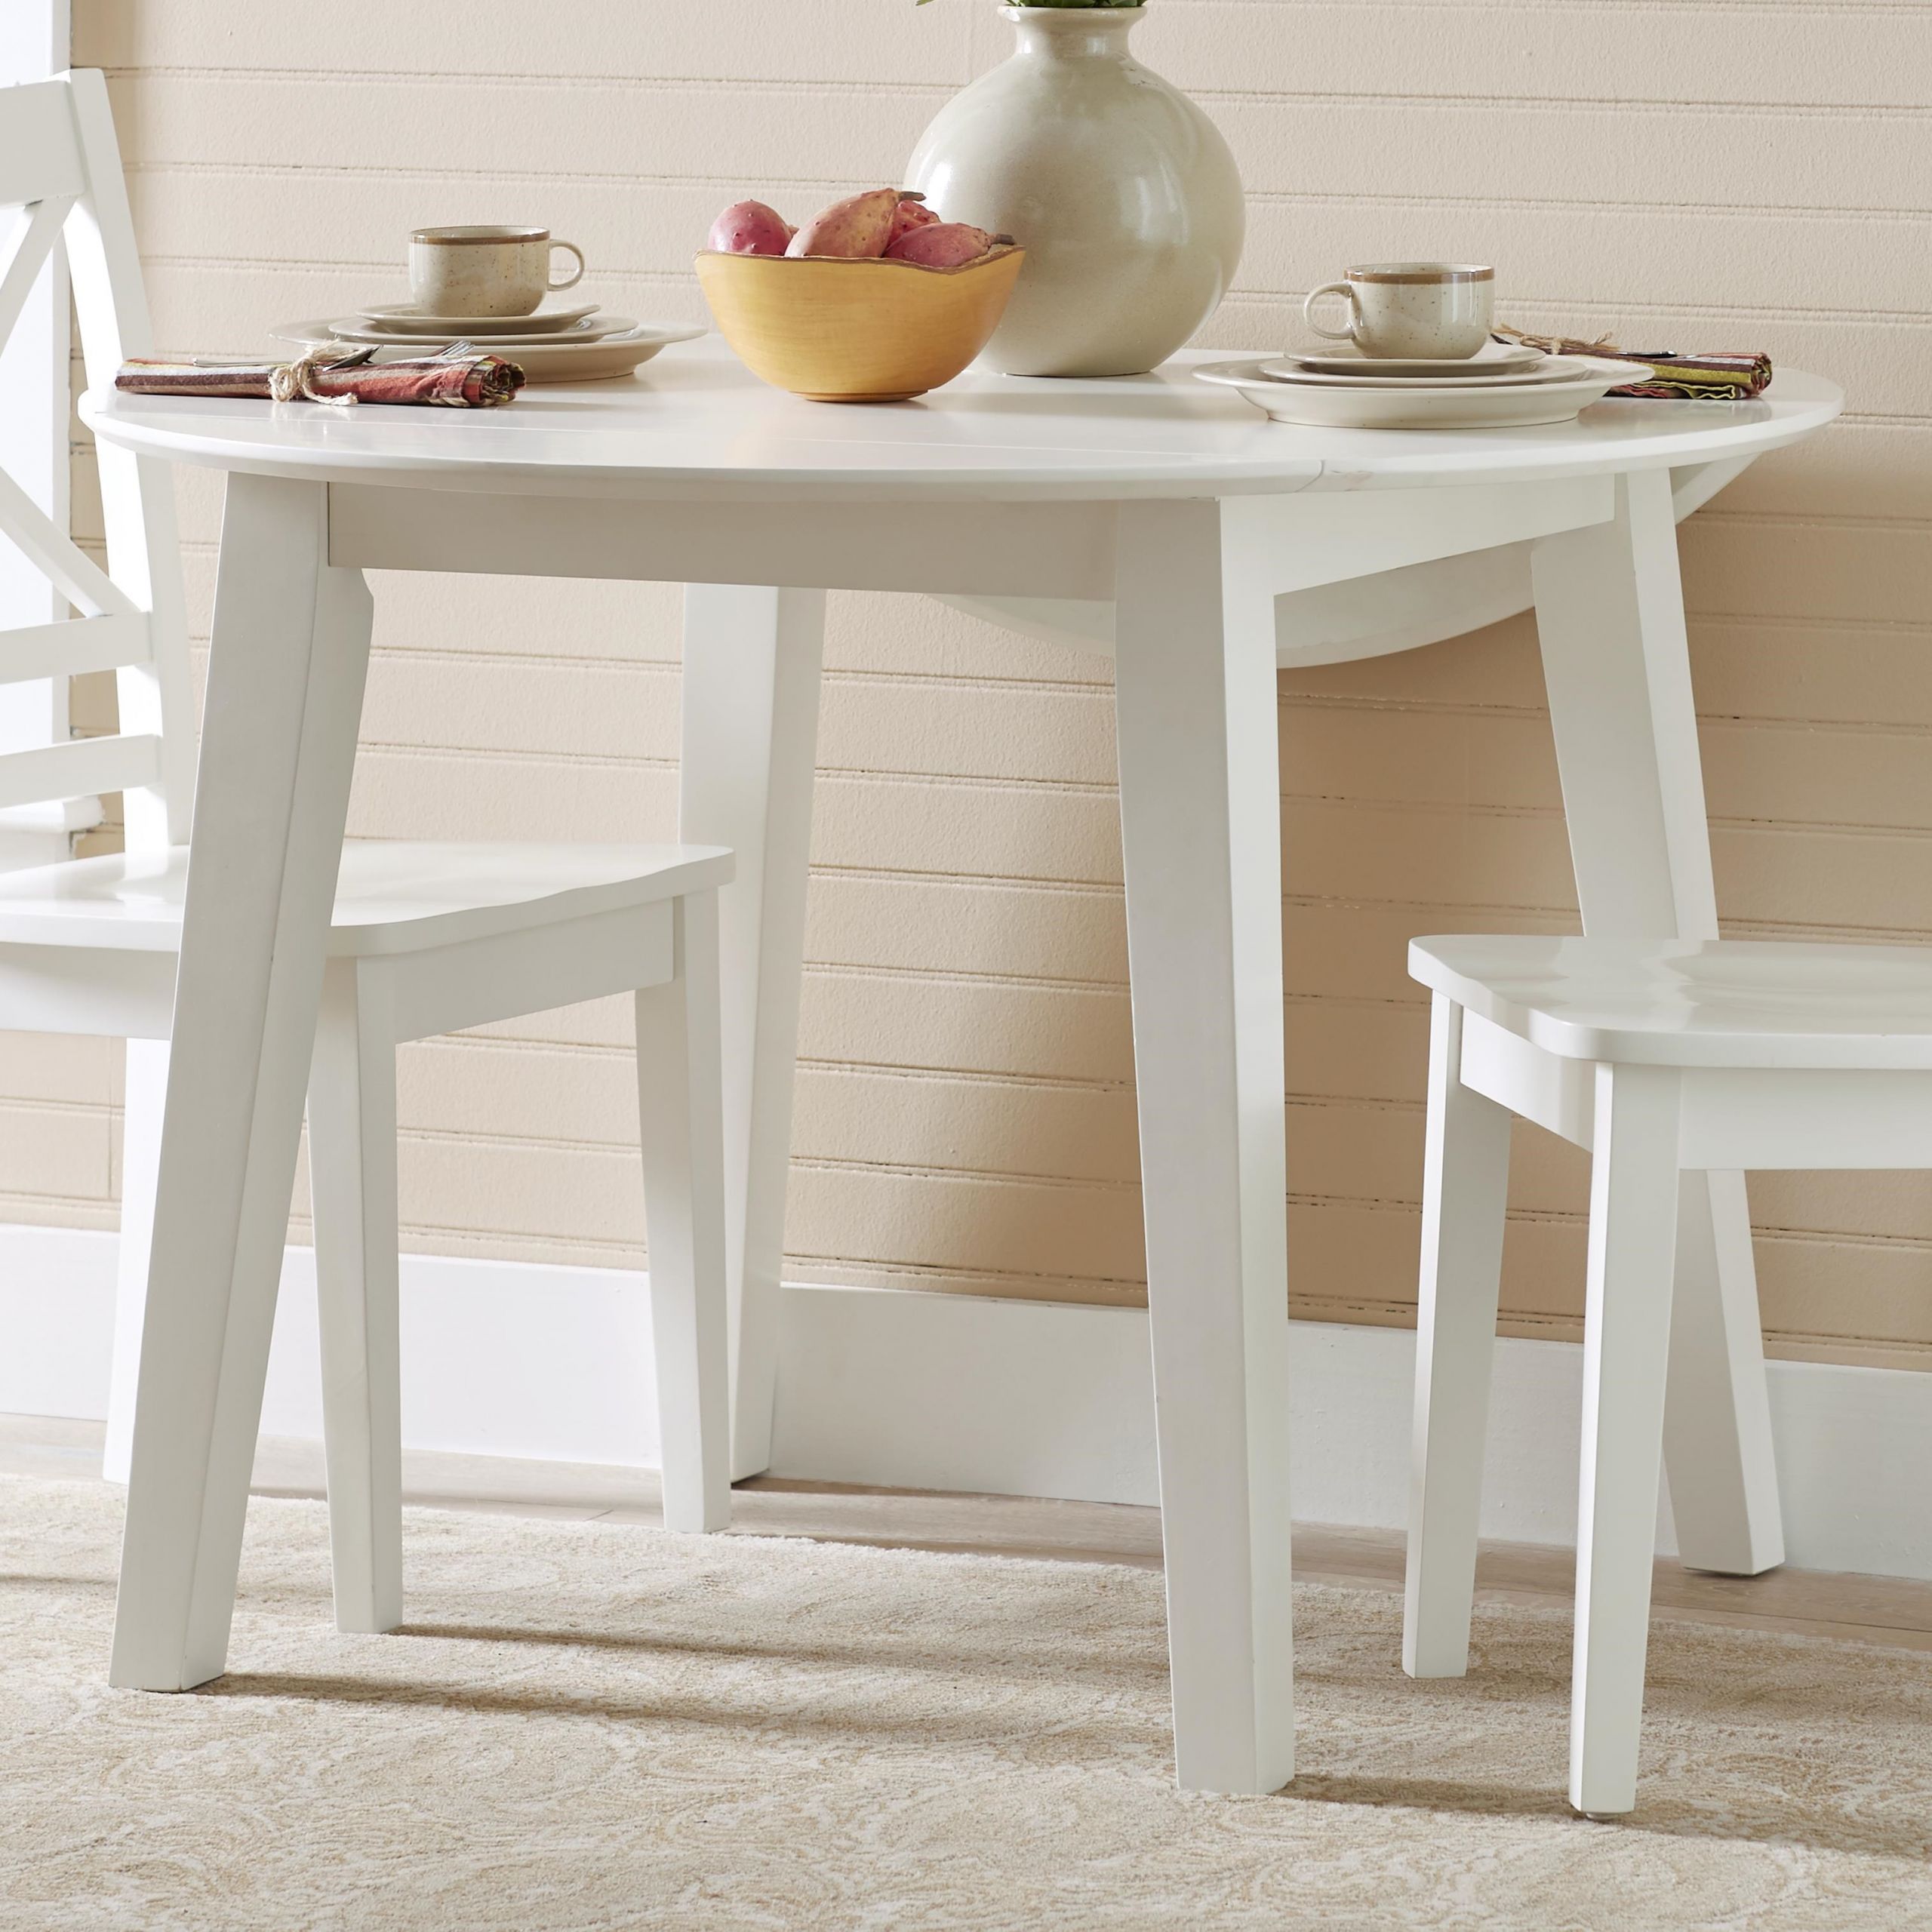 White Drop Leaf Kitchen Table
 Jofran Simplicity Round Drop Leaf Table that Seats 4 for